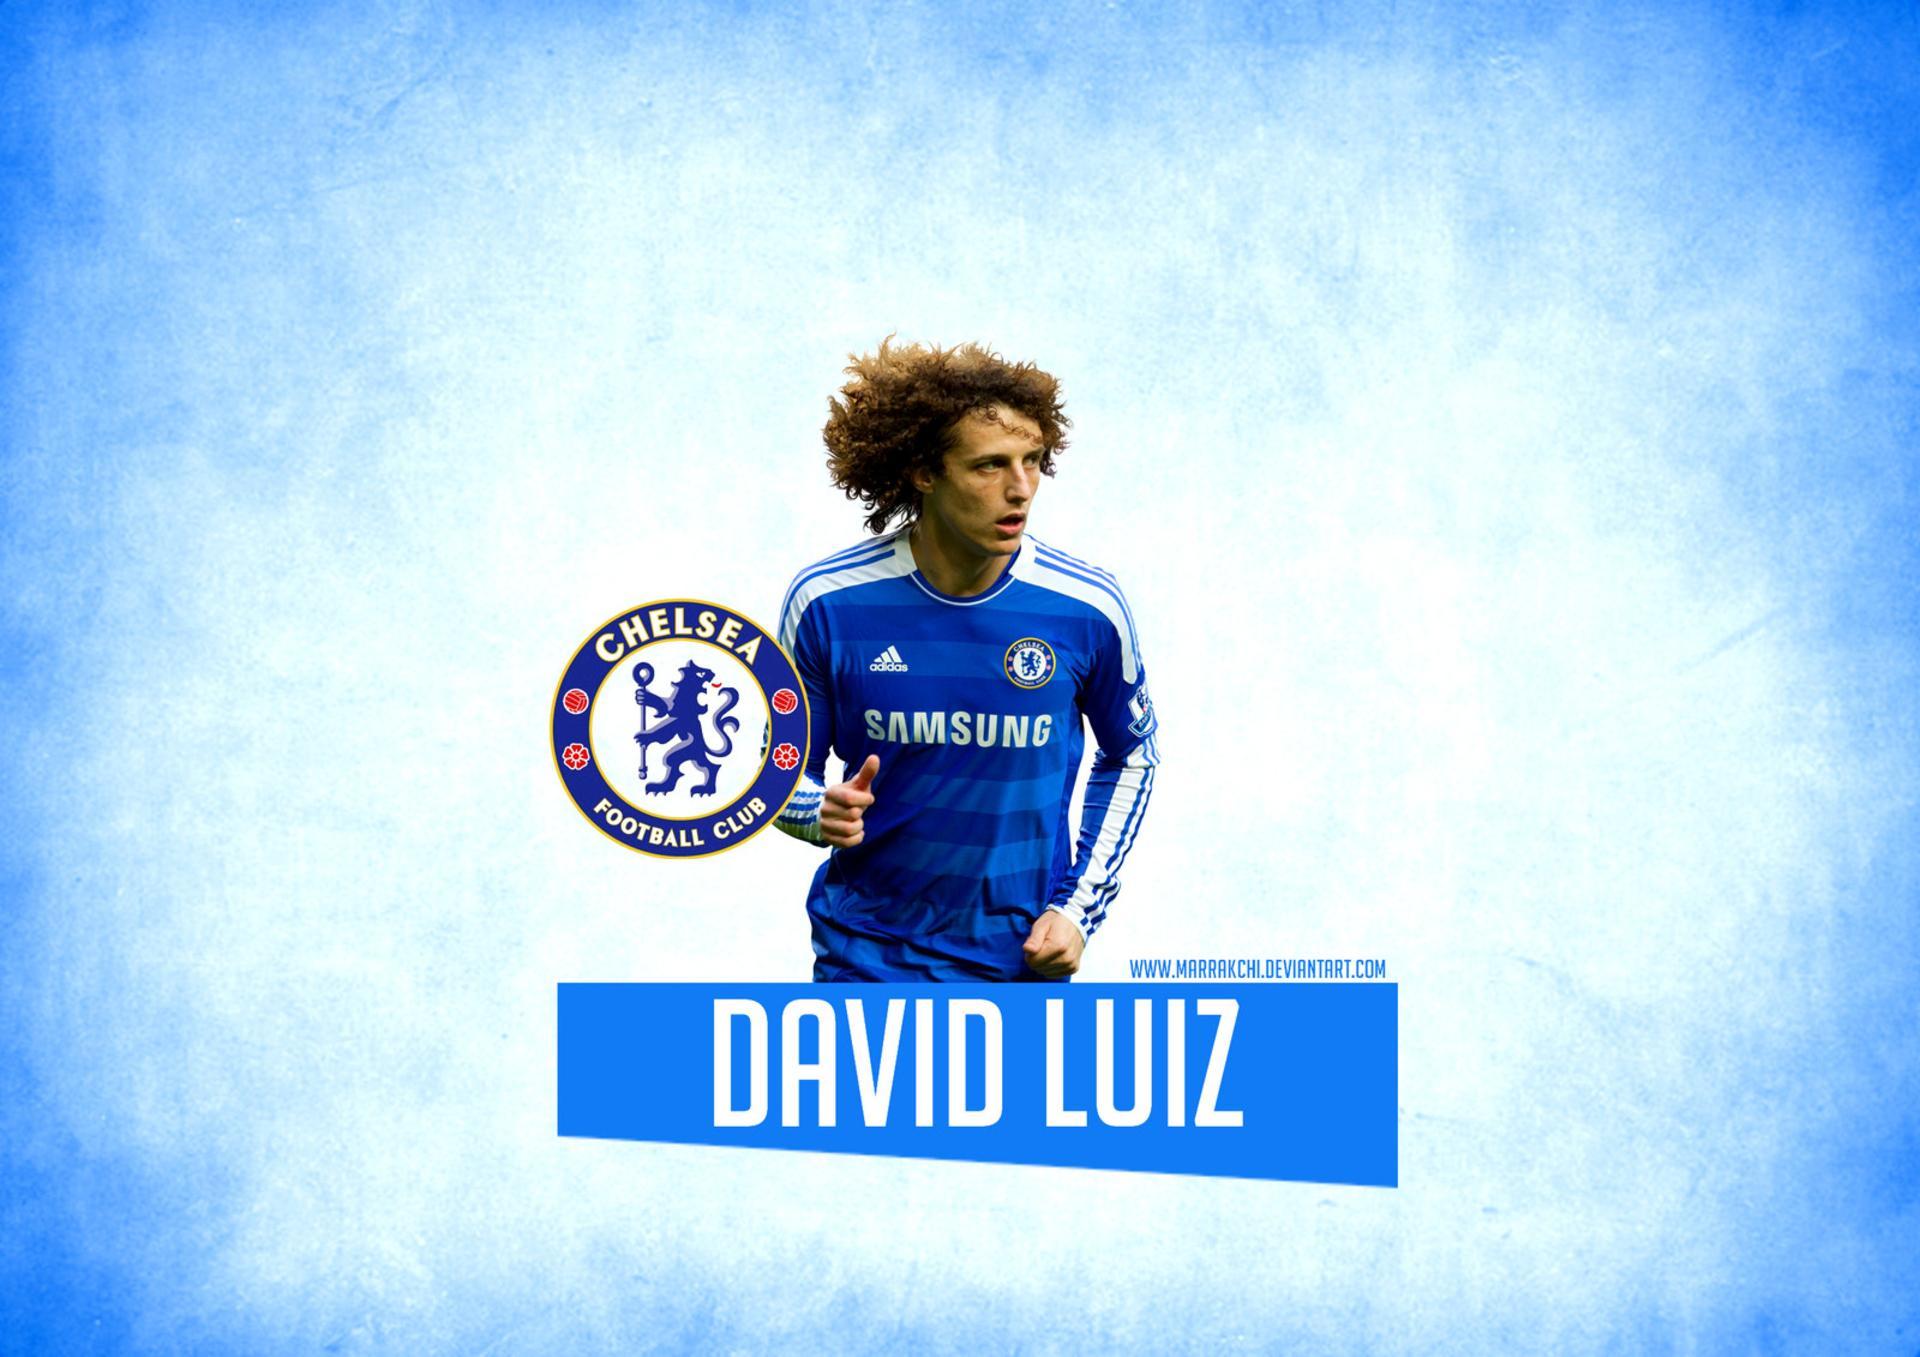 Chelsea David Luiz on the blue background wallpaper and image